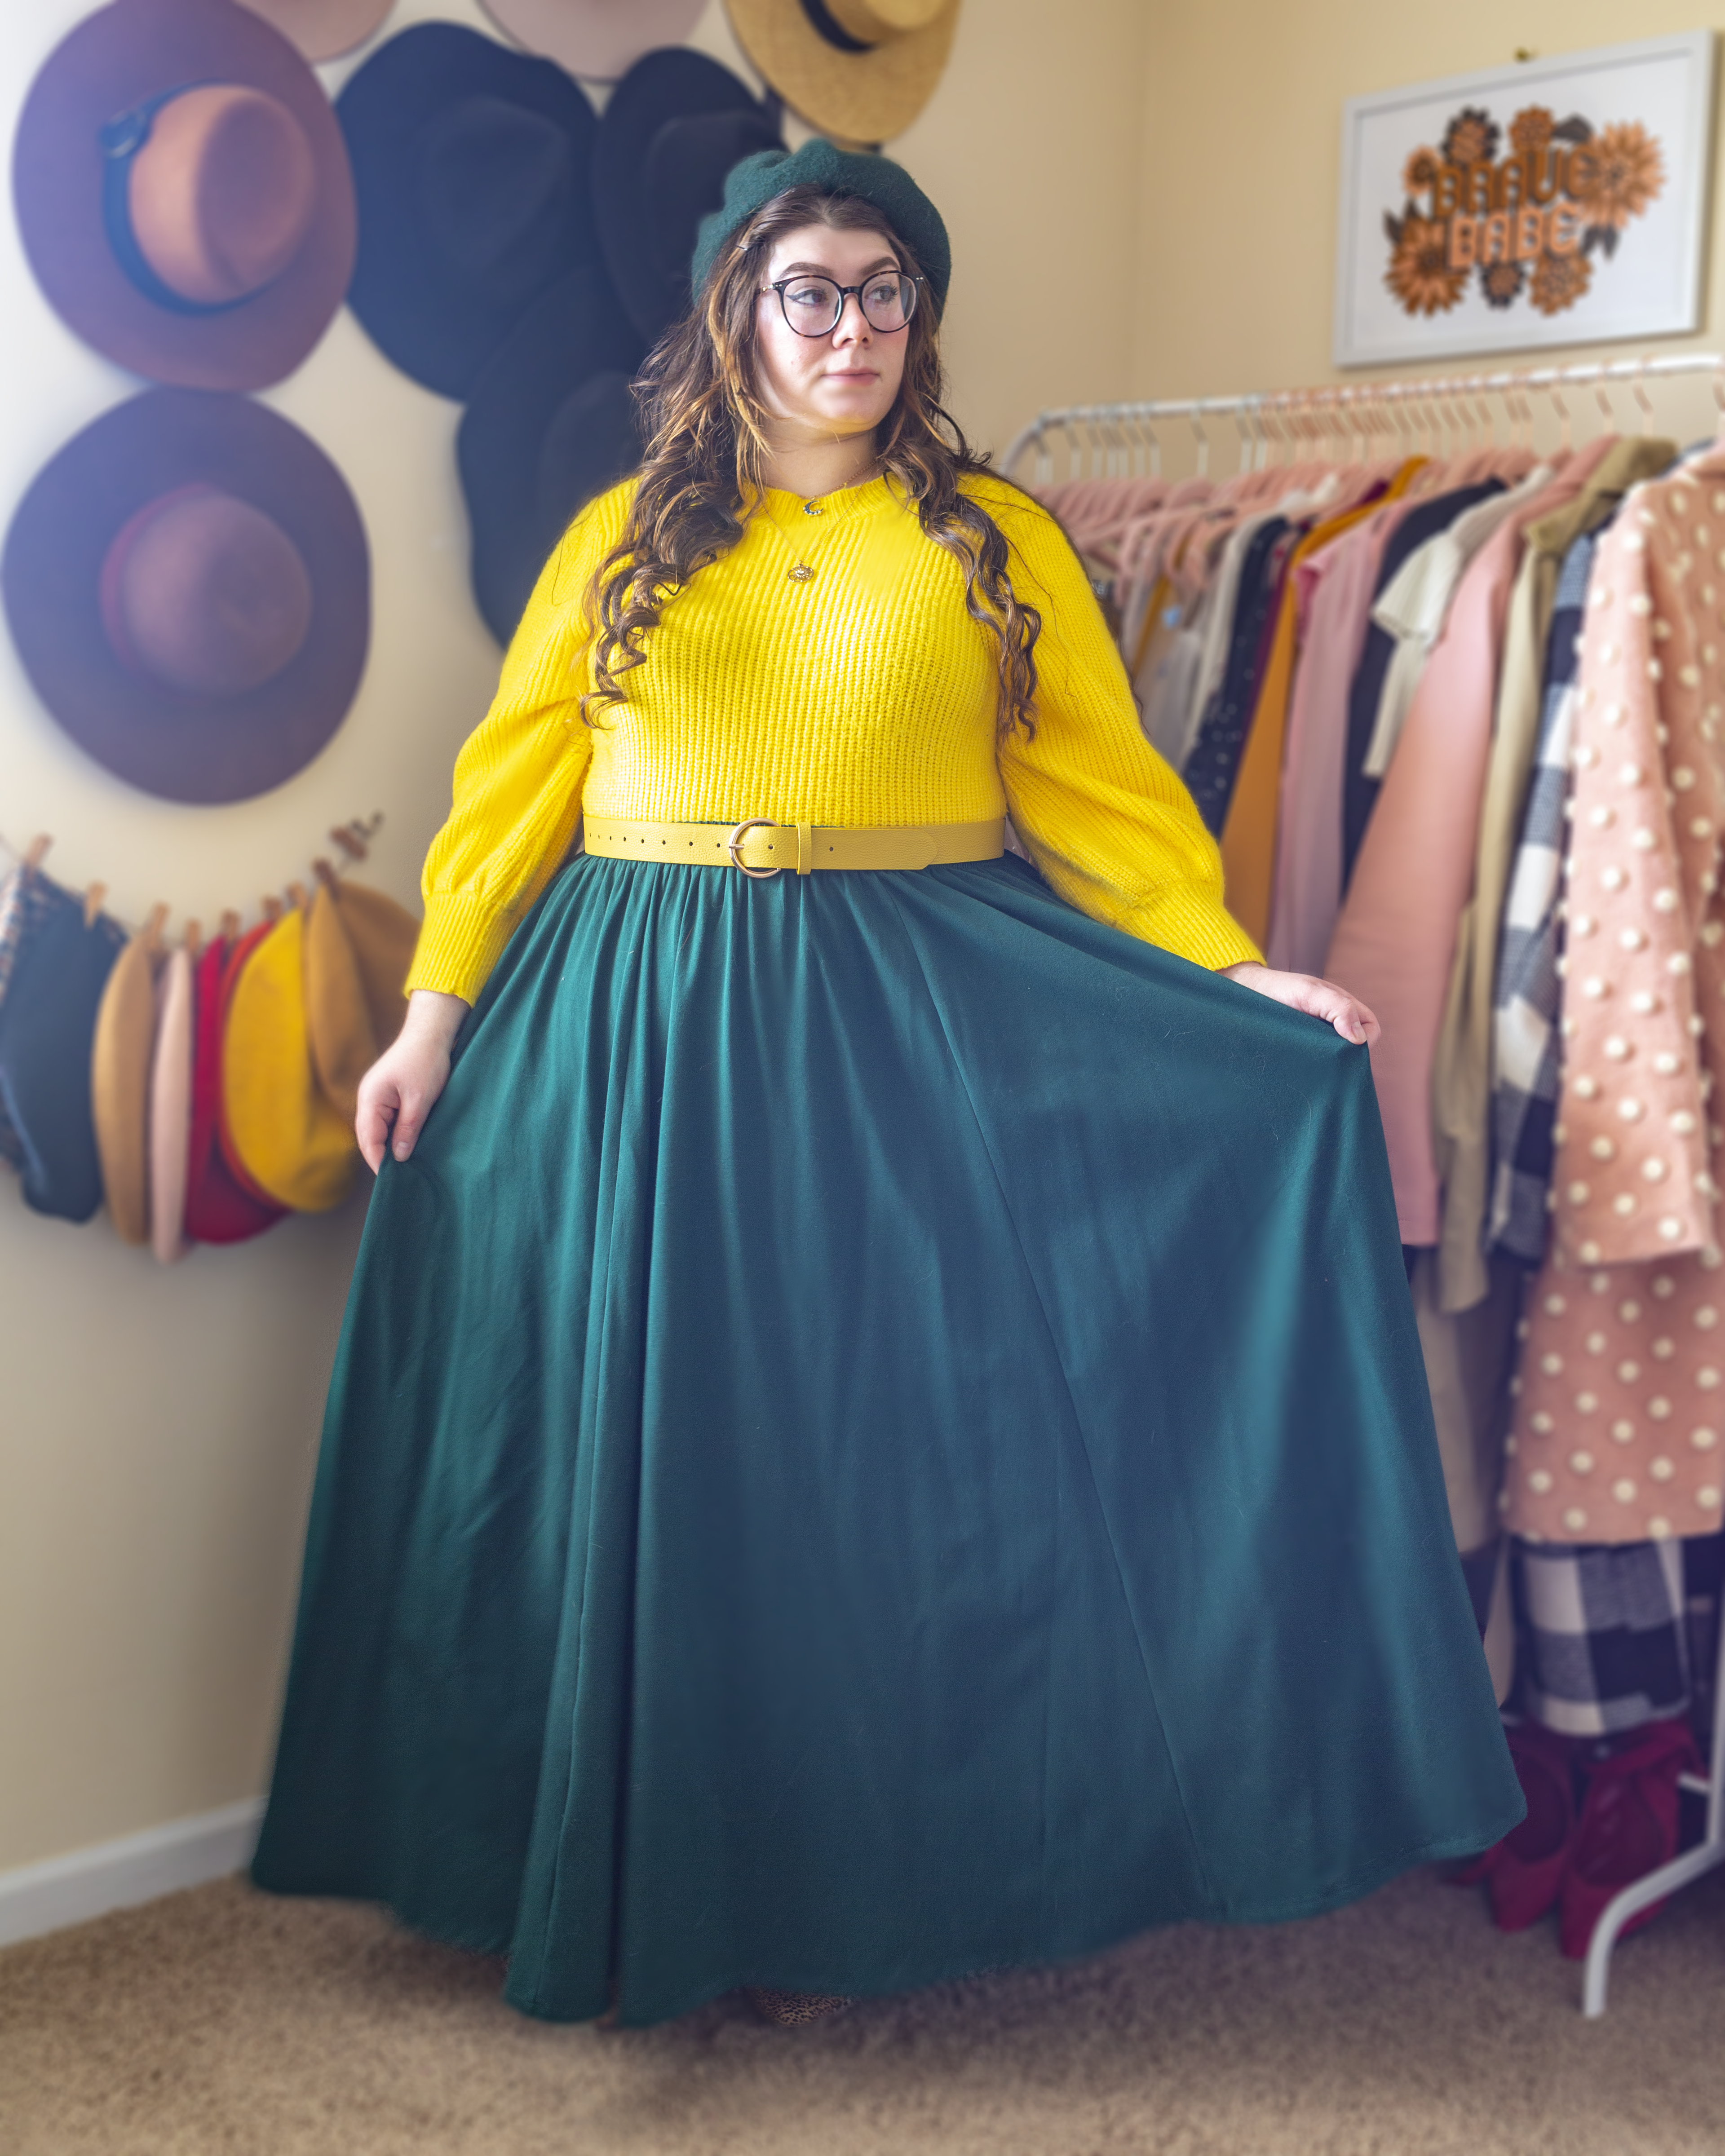 An outfit consisting of a banana yellow mock neck sweater with balloon sleeves tucked into a dark green floor length A-line skirt and beige and black animal print heeled clogs.